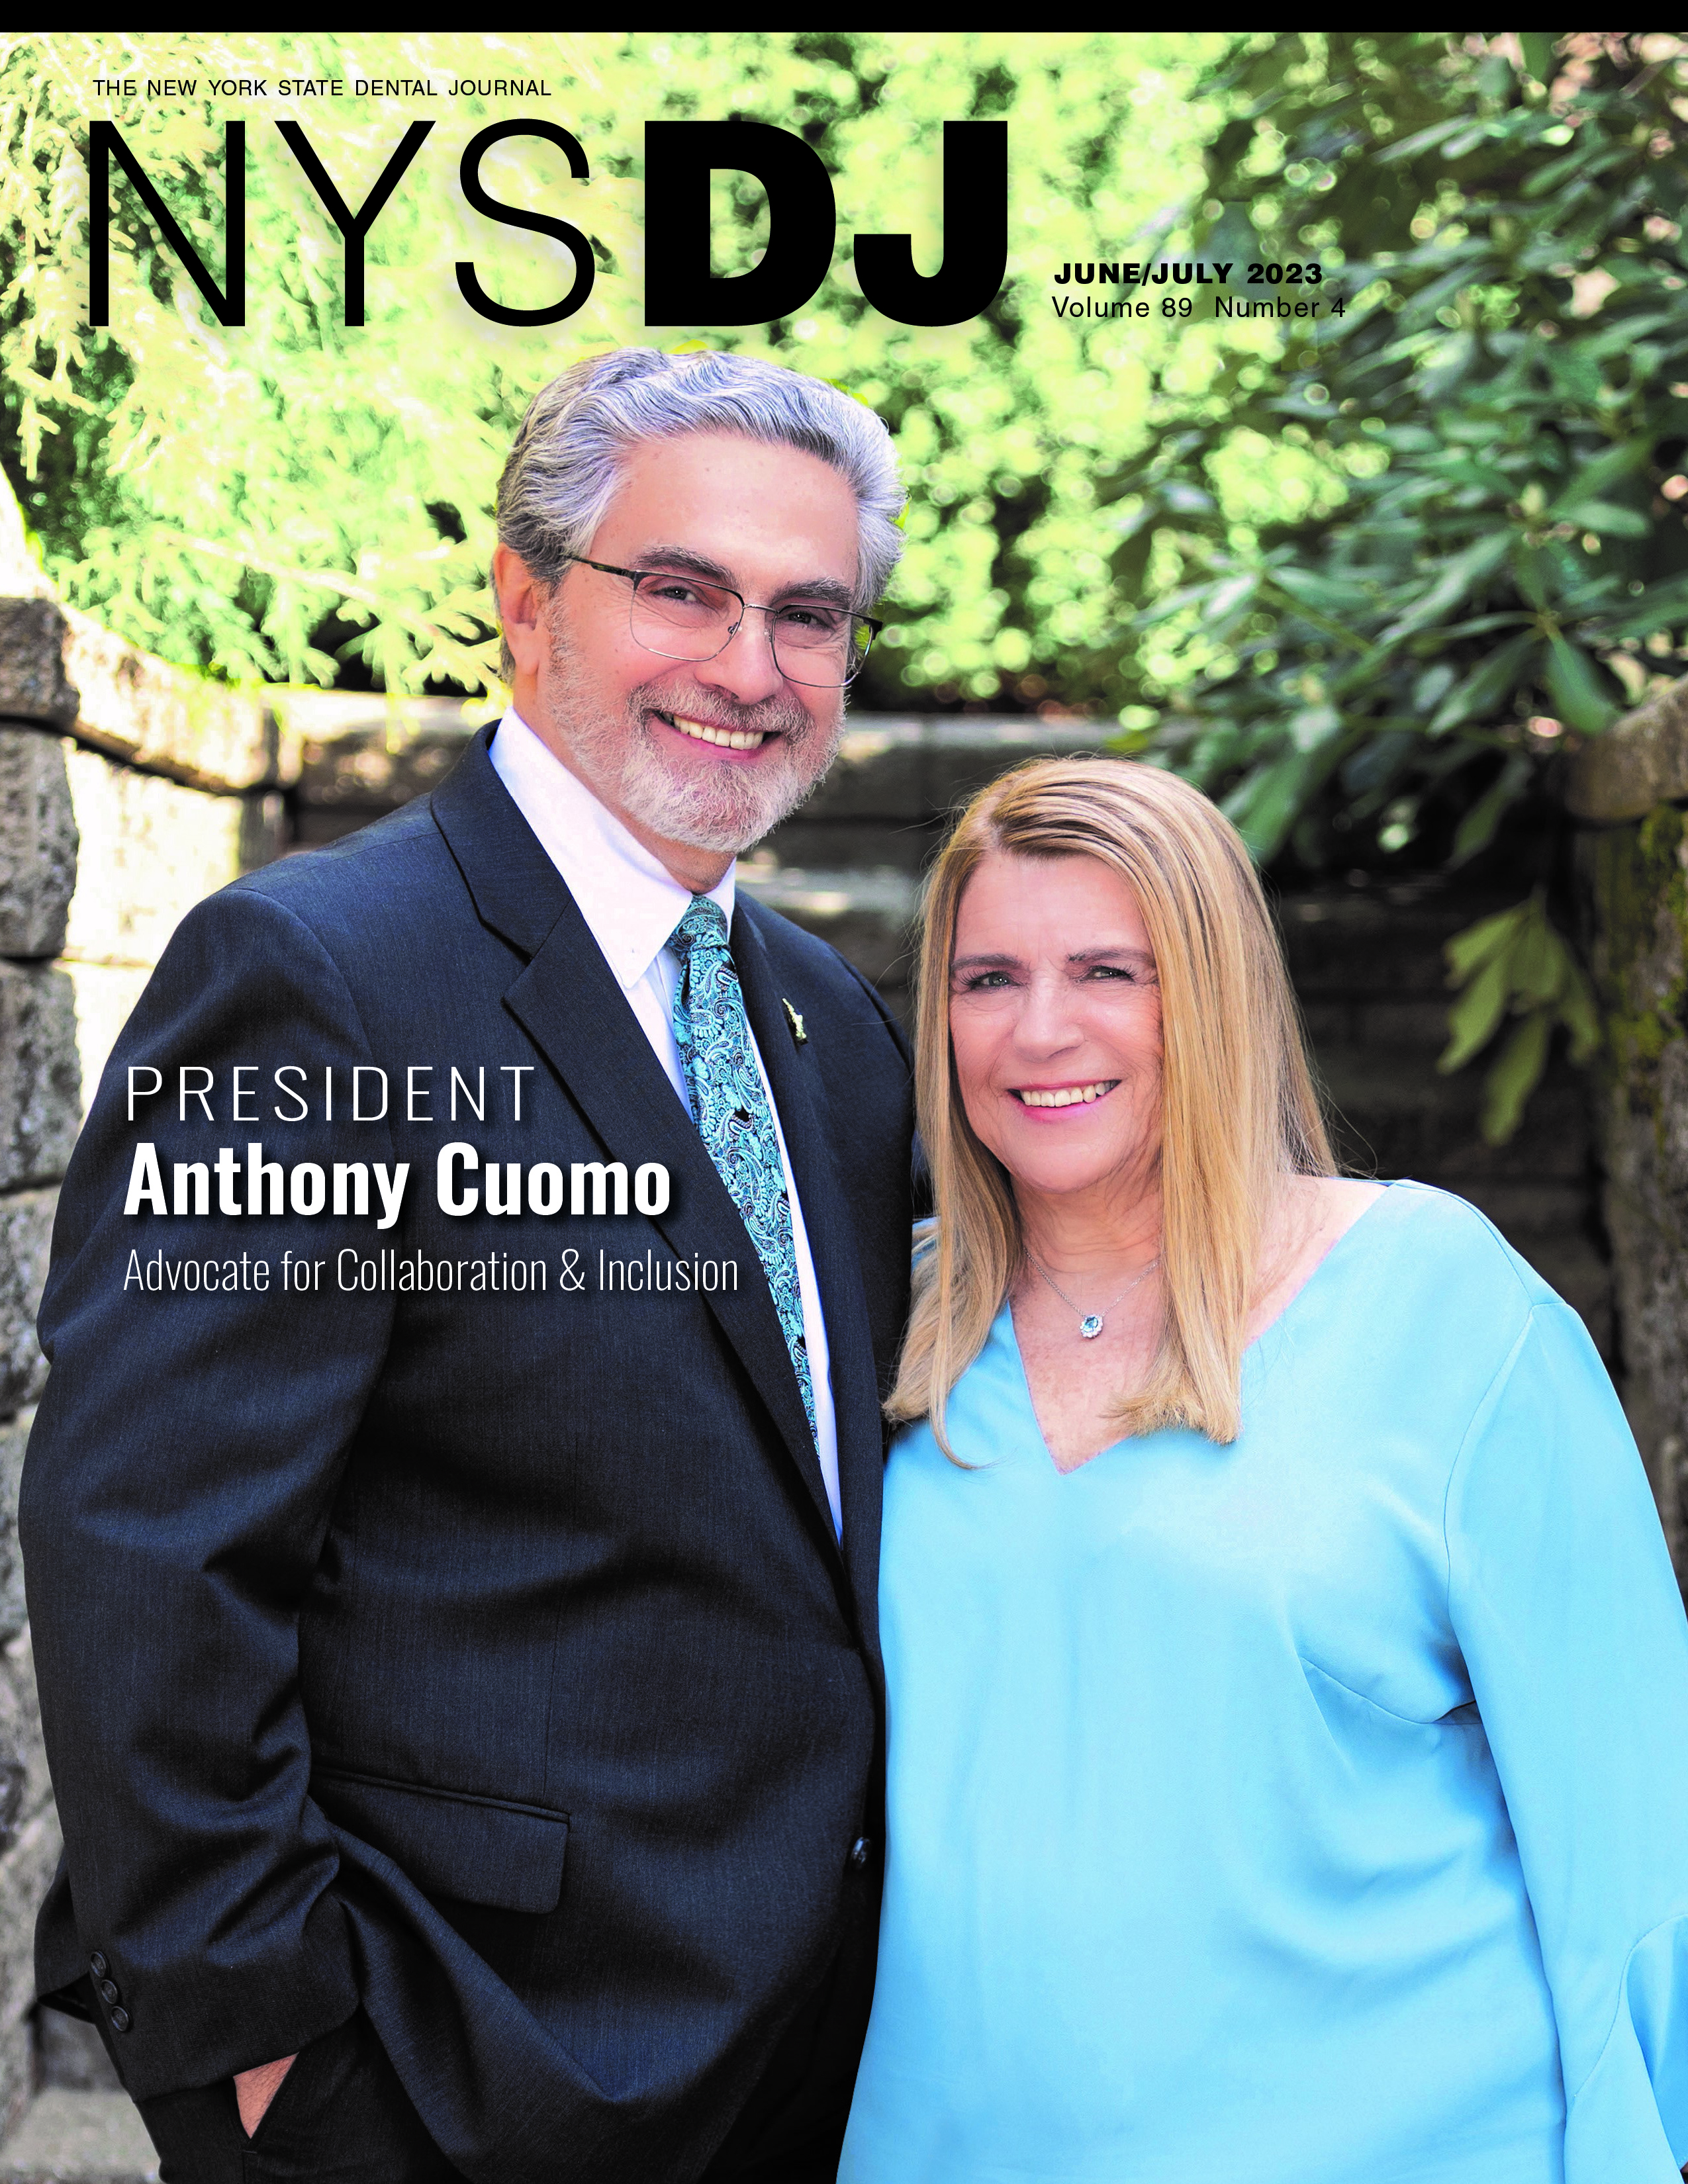 Cover of the NYSDJ with 143rd president of the New York State Dental Association Anthony M. Cuomo, D.D.S., and wife, Patricia.